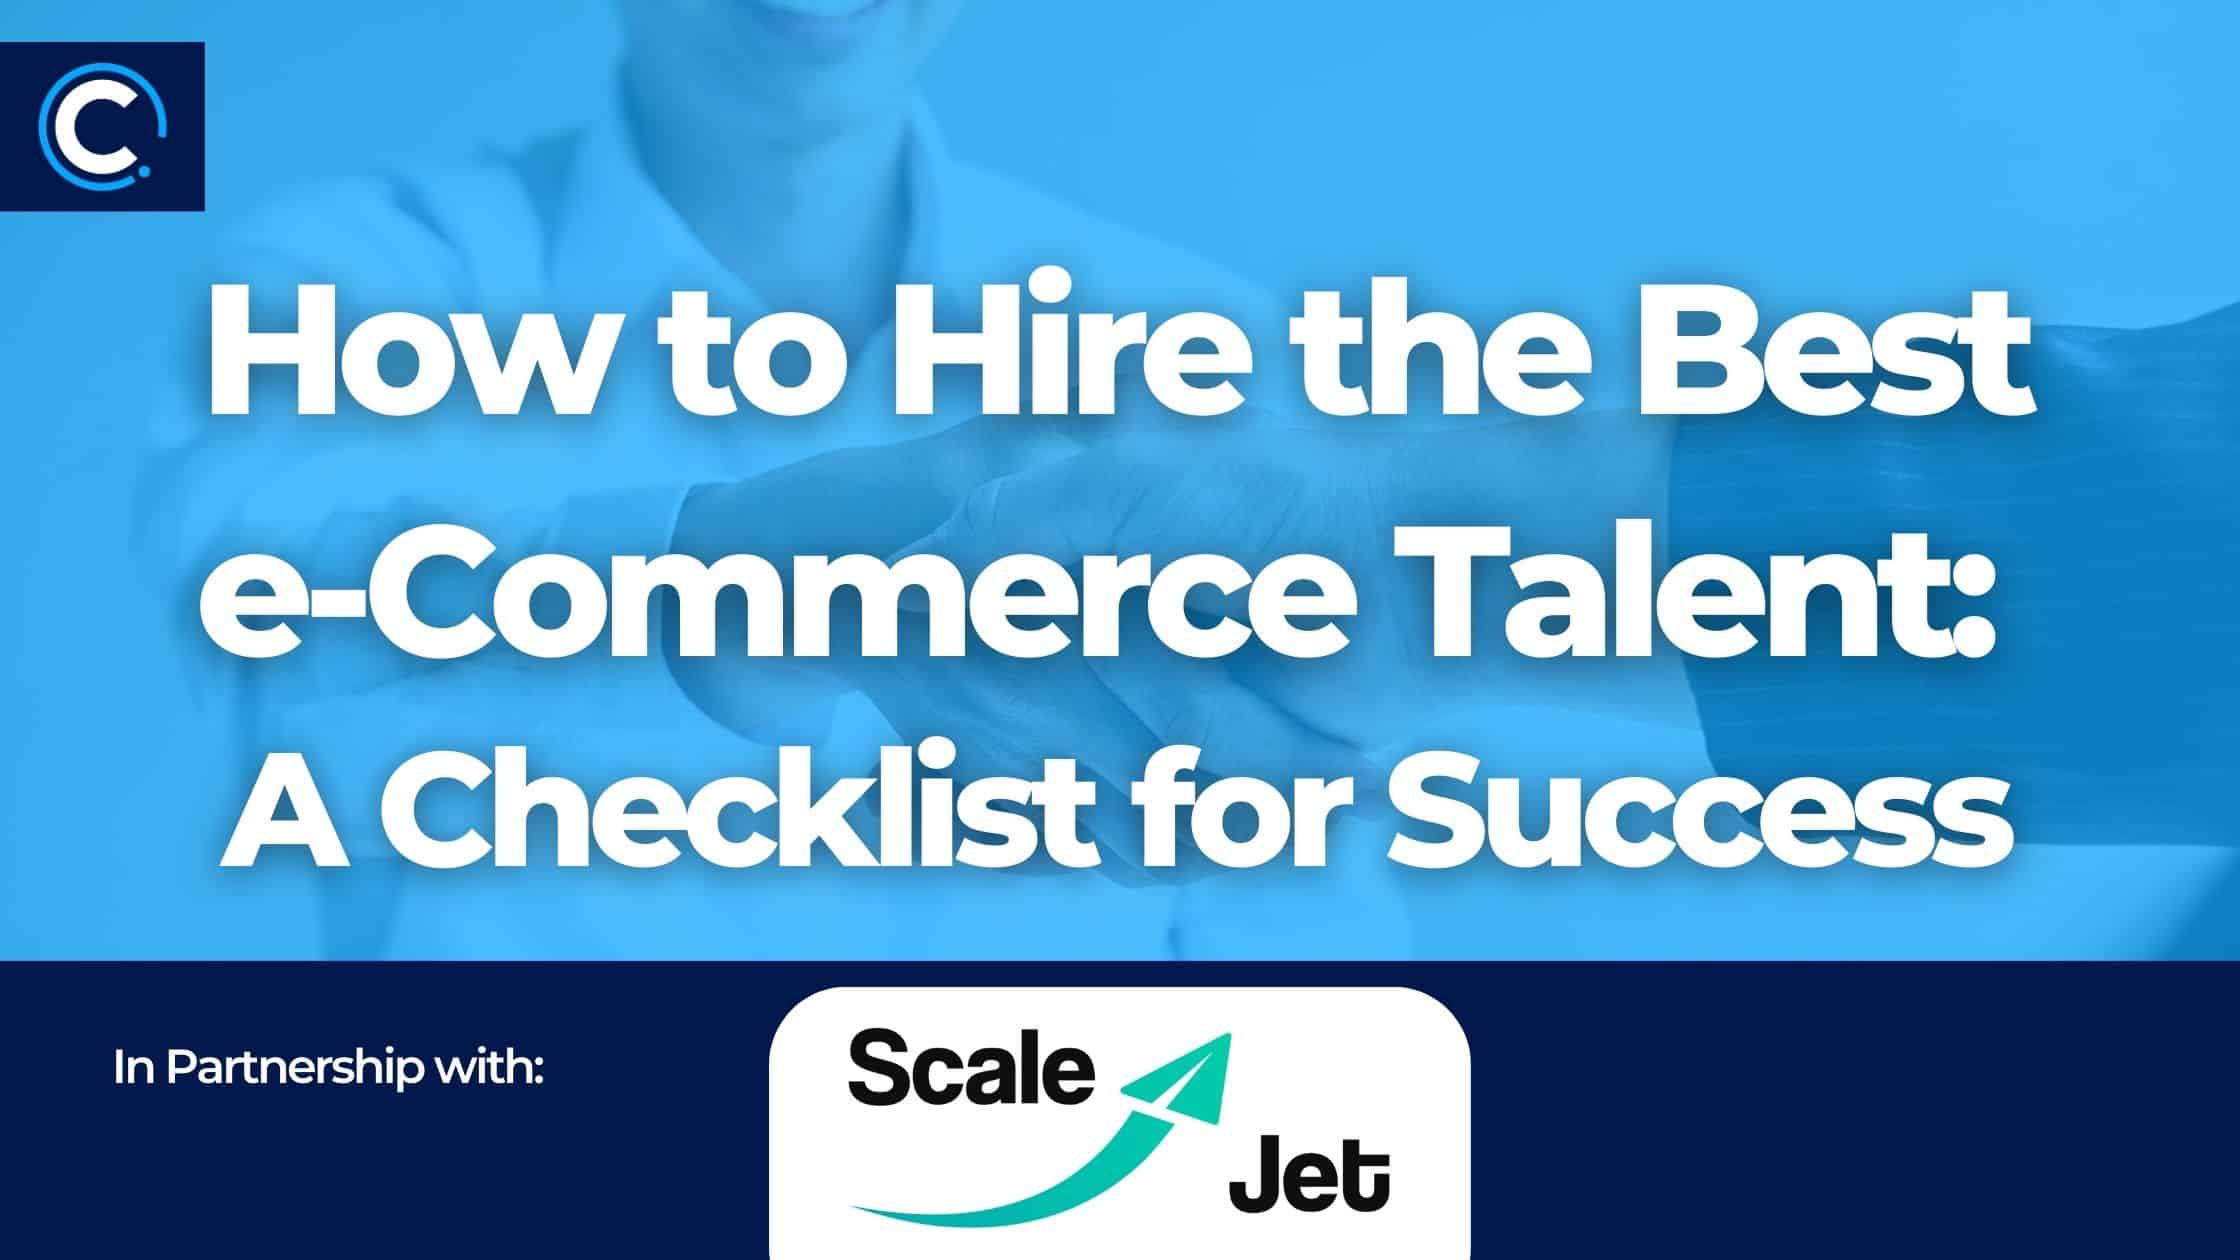 How to Hire the Best e-Commerce Talent A Checklist for Success